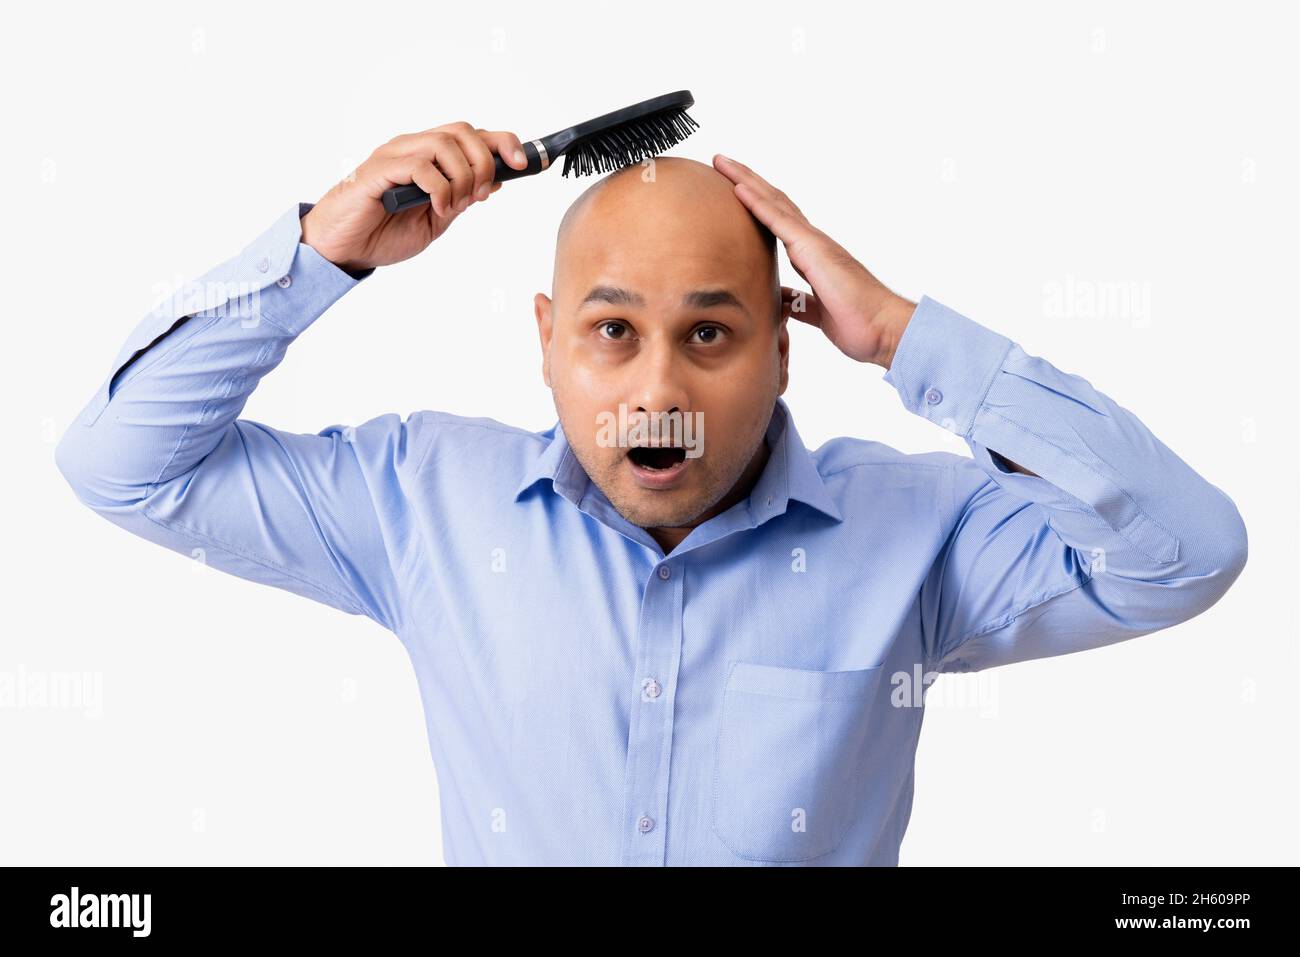 Portrait of a bald man combing his shaved head while gaping against white background. Stock Photo